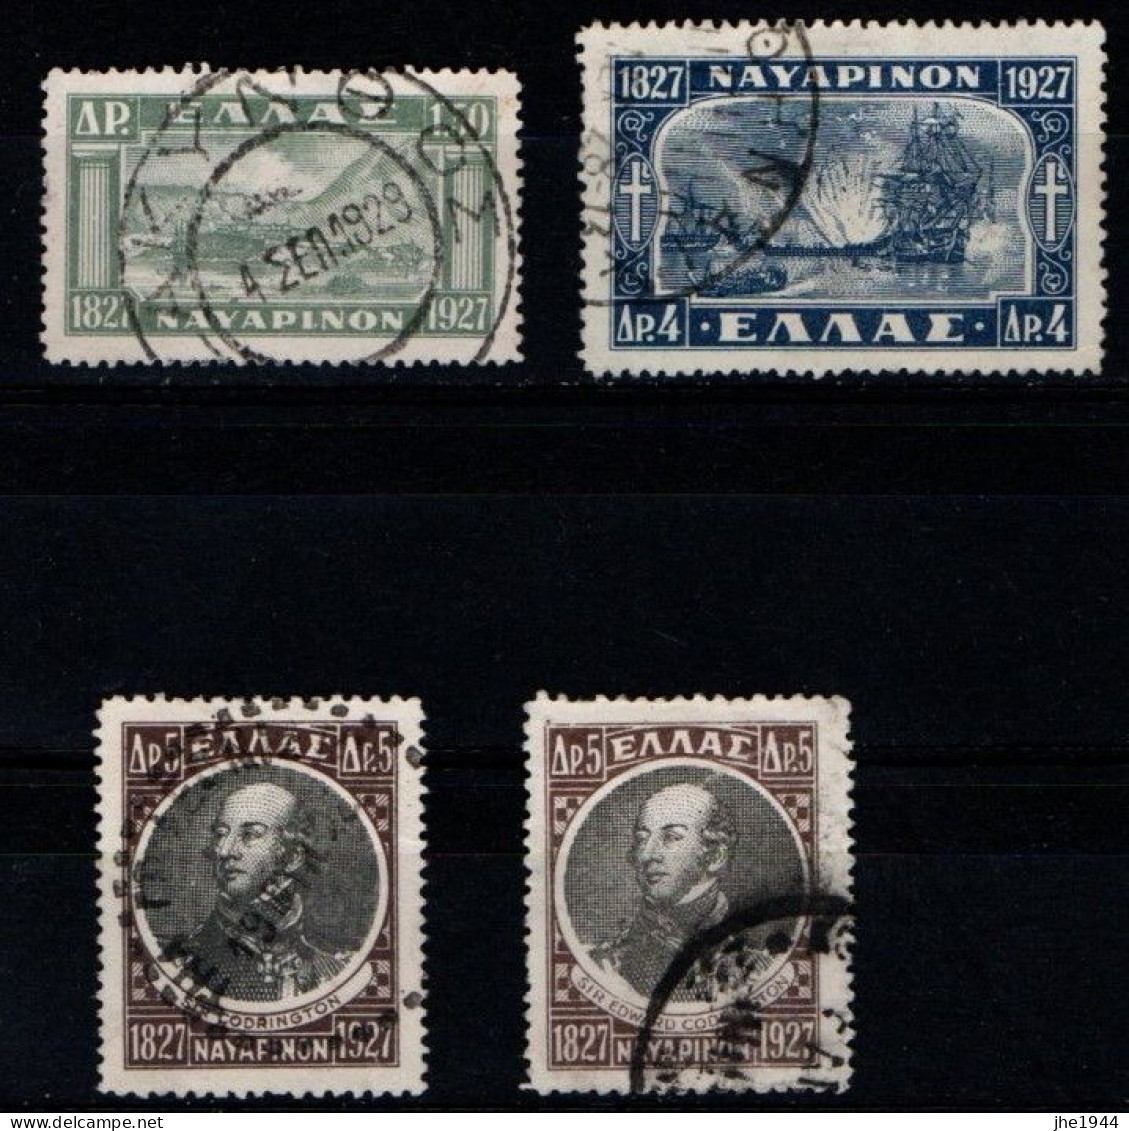 Grece N° 0369 à 372 Centenaire Bataille Navarin - Used Stamps